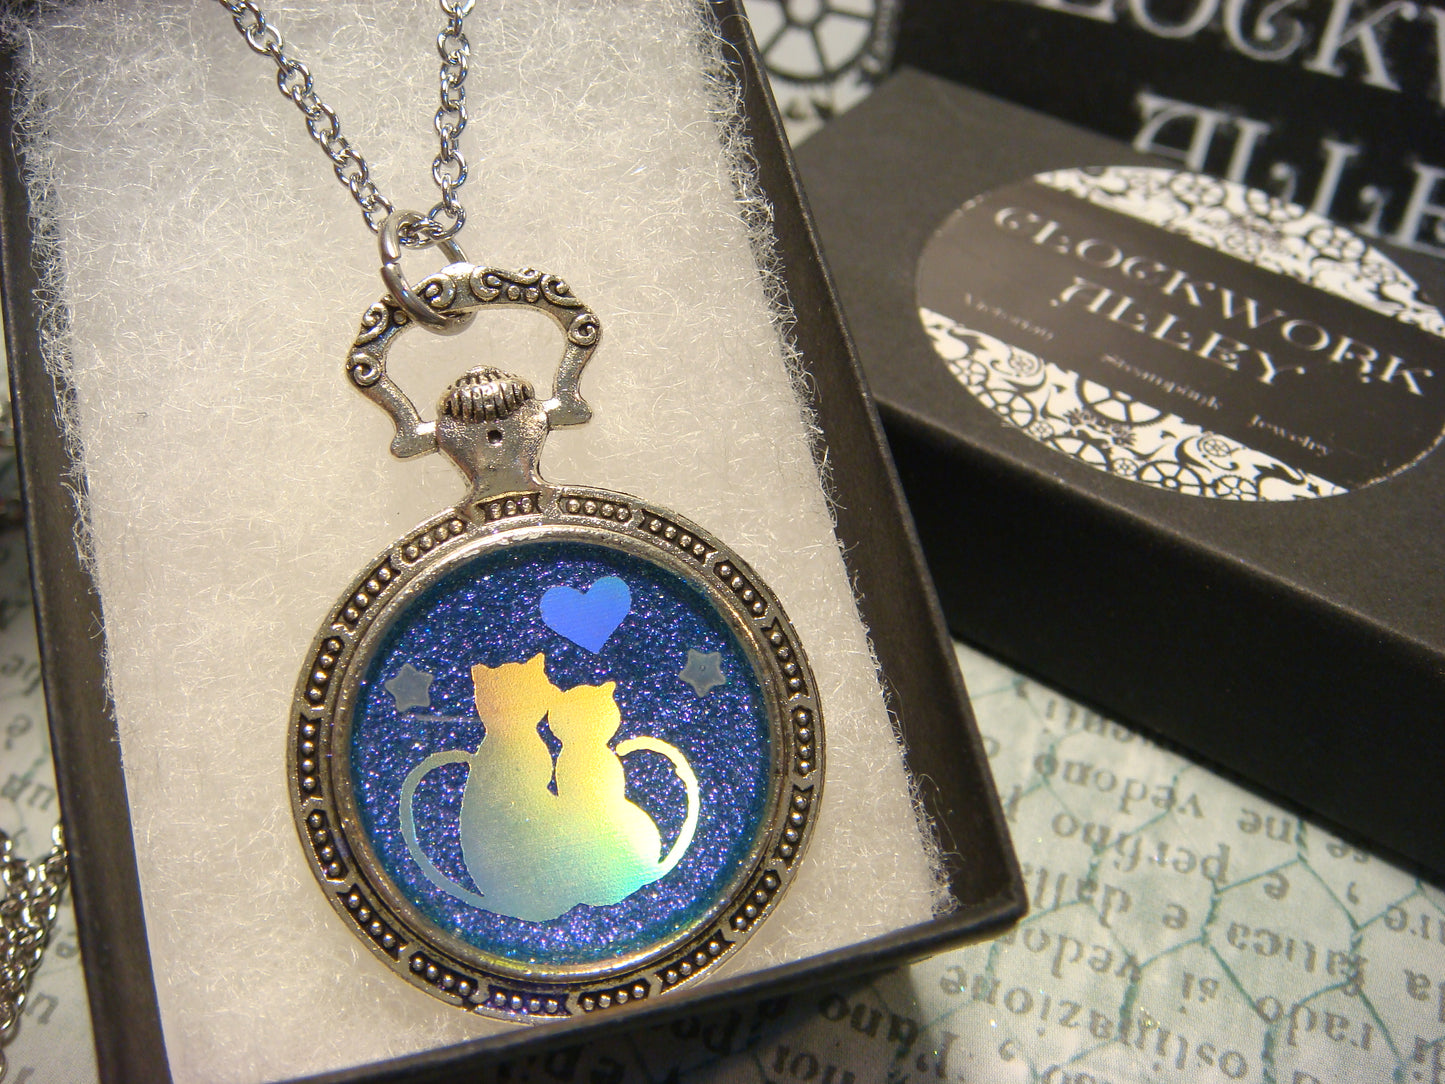 Snuggling Cats with Heart Pocket Watch Pendant Necklace